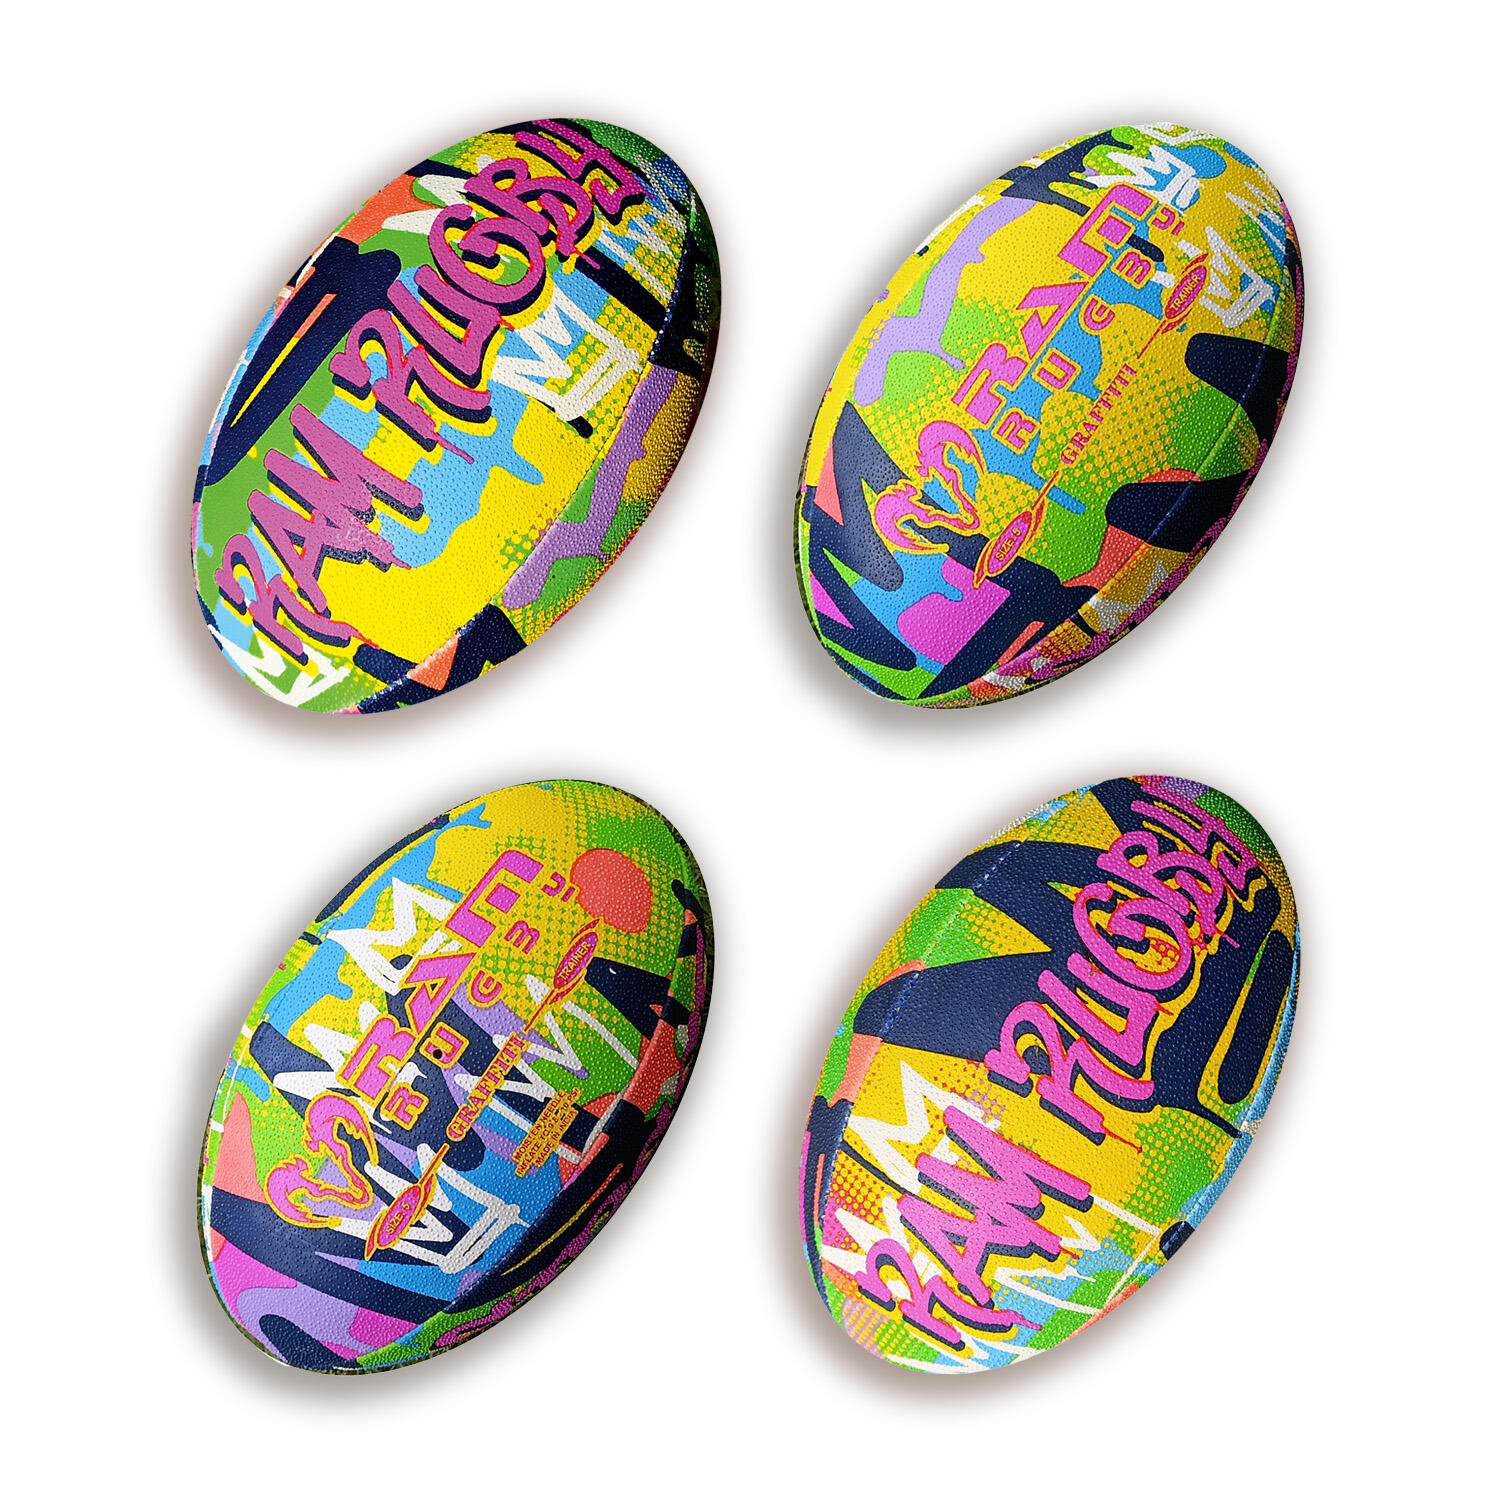 Ram Rugby Ball - Squad - Trainer - (Size 3) - Graffiti 2/2